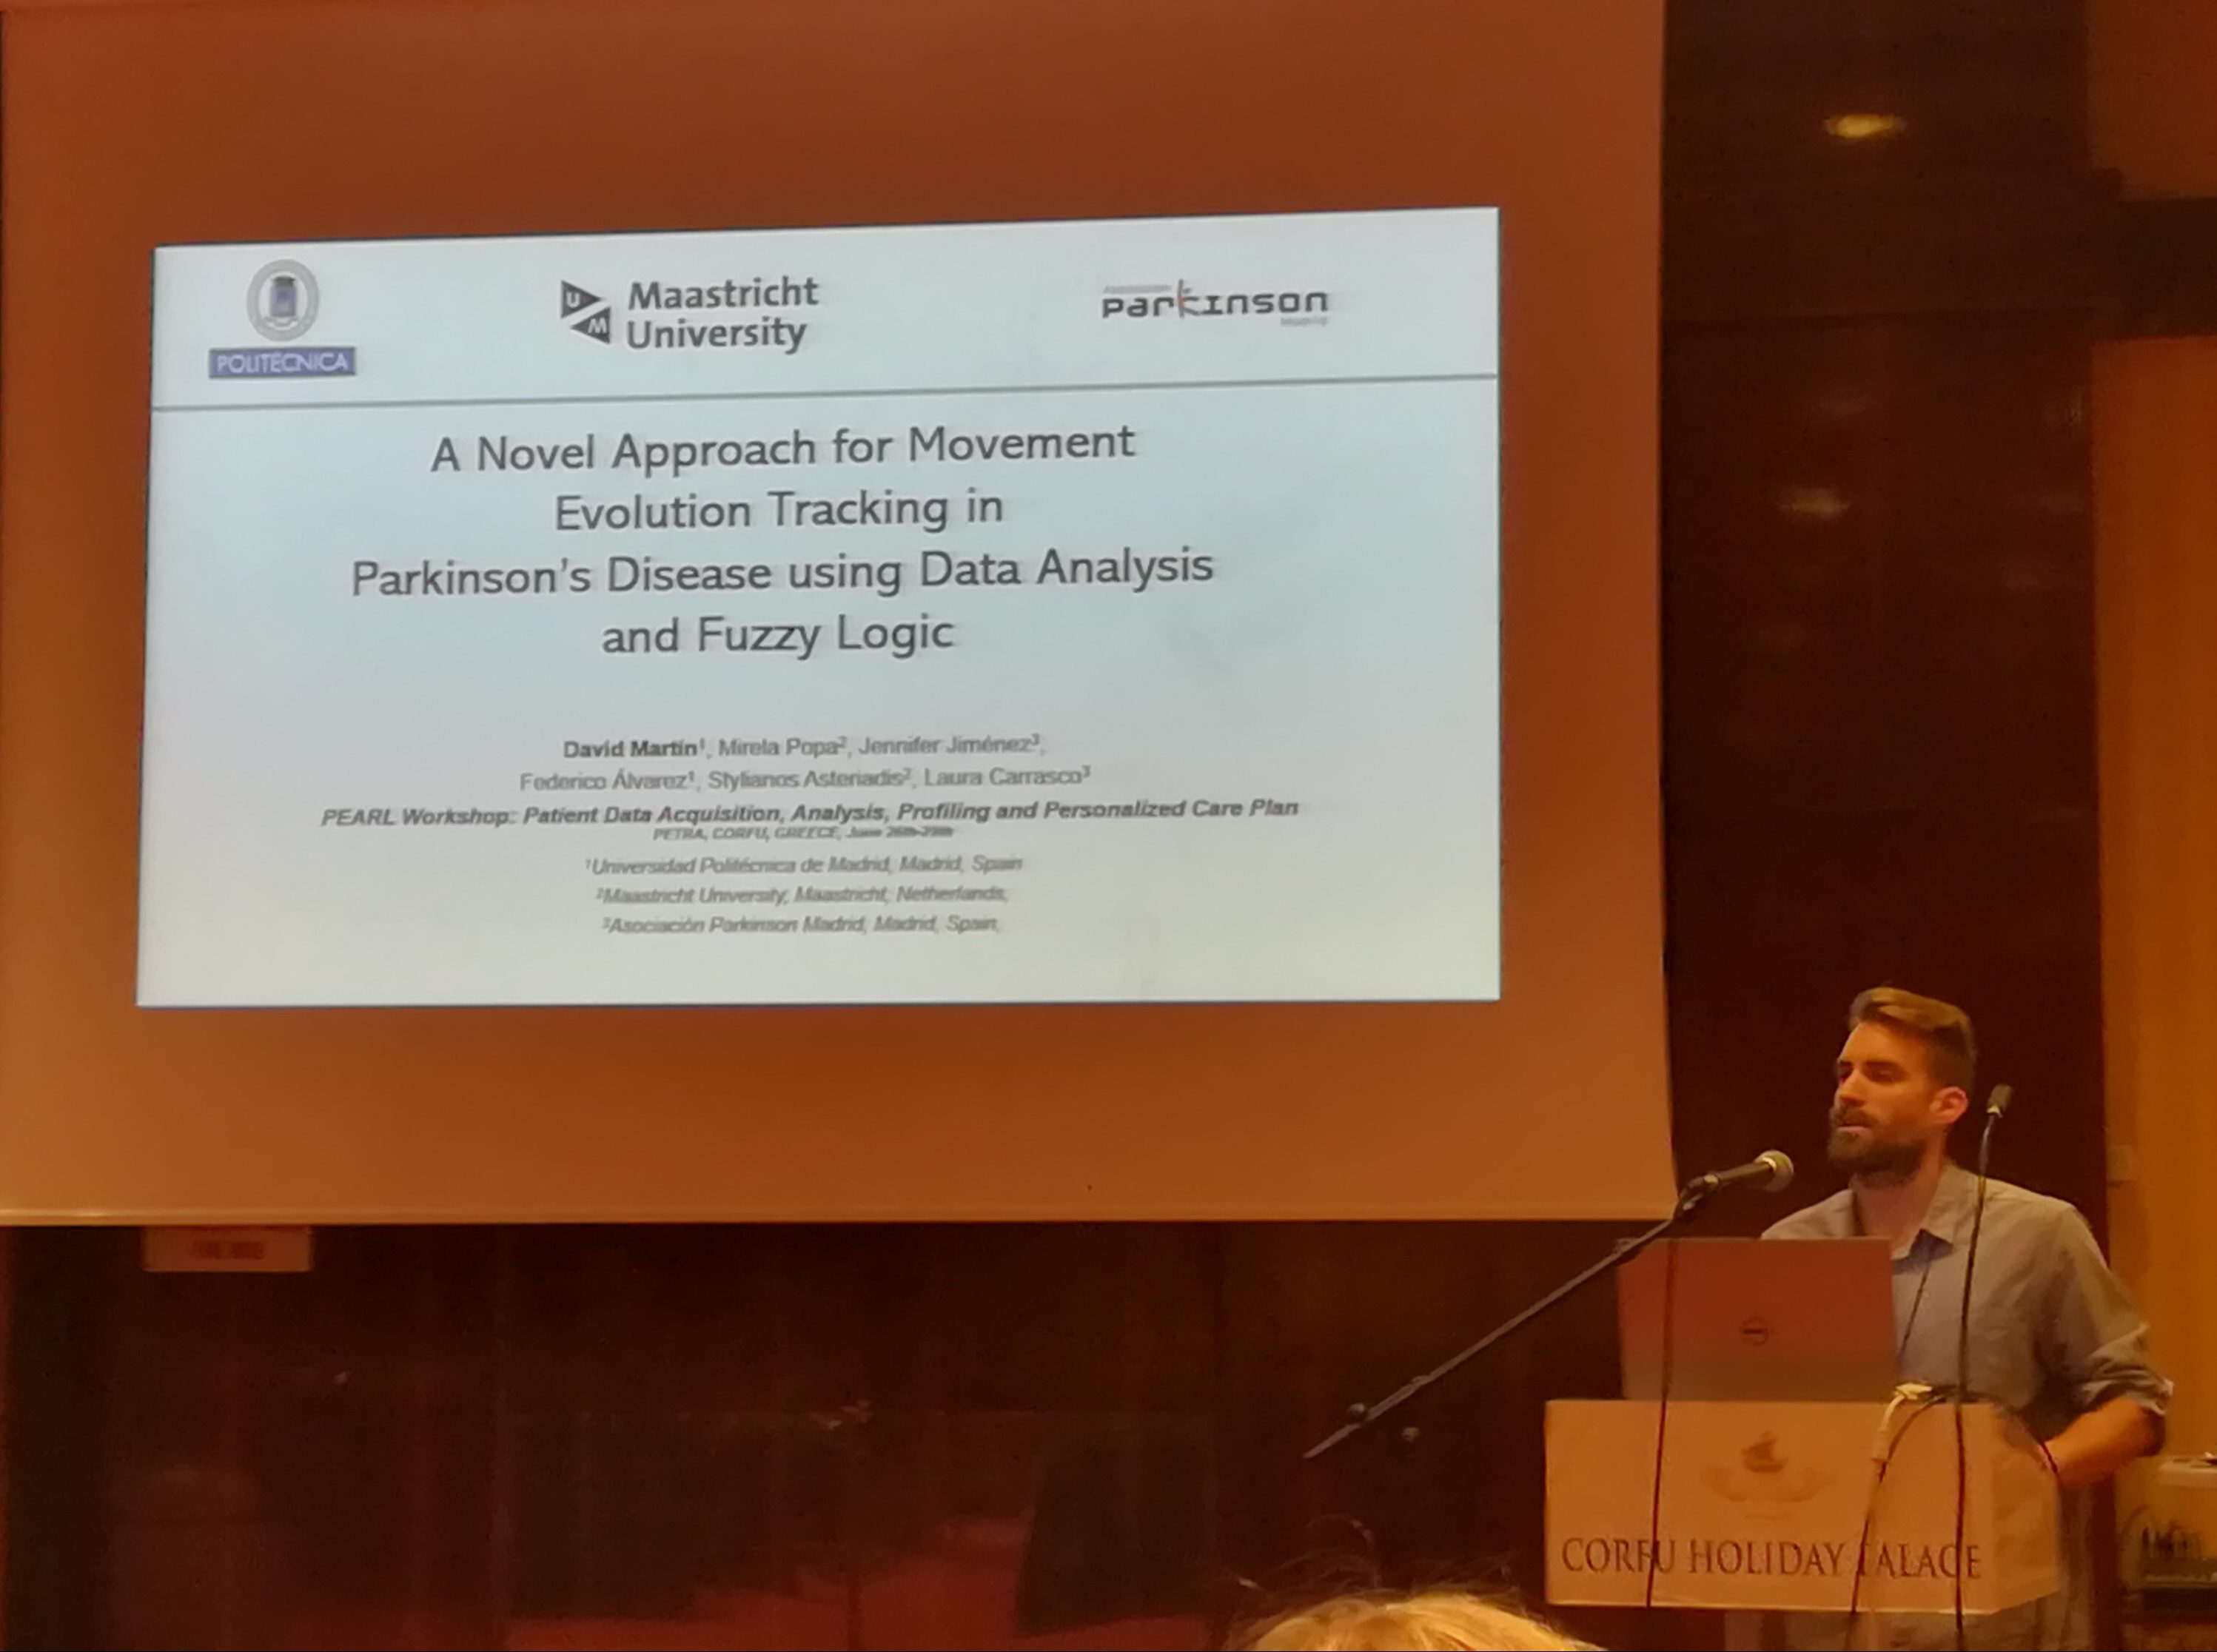 David Martín presenting the tracking of Parkinsons patients based on data analysis